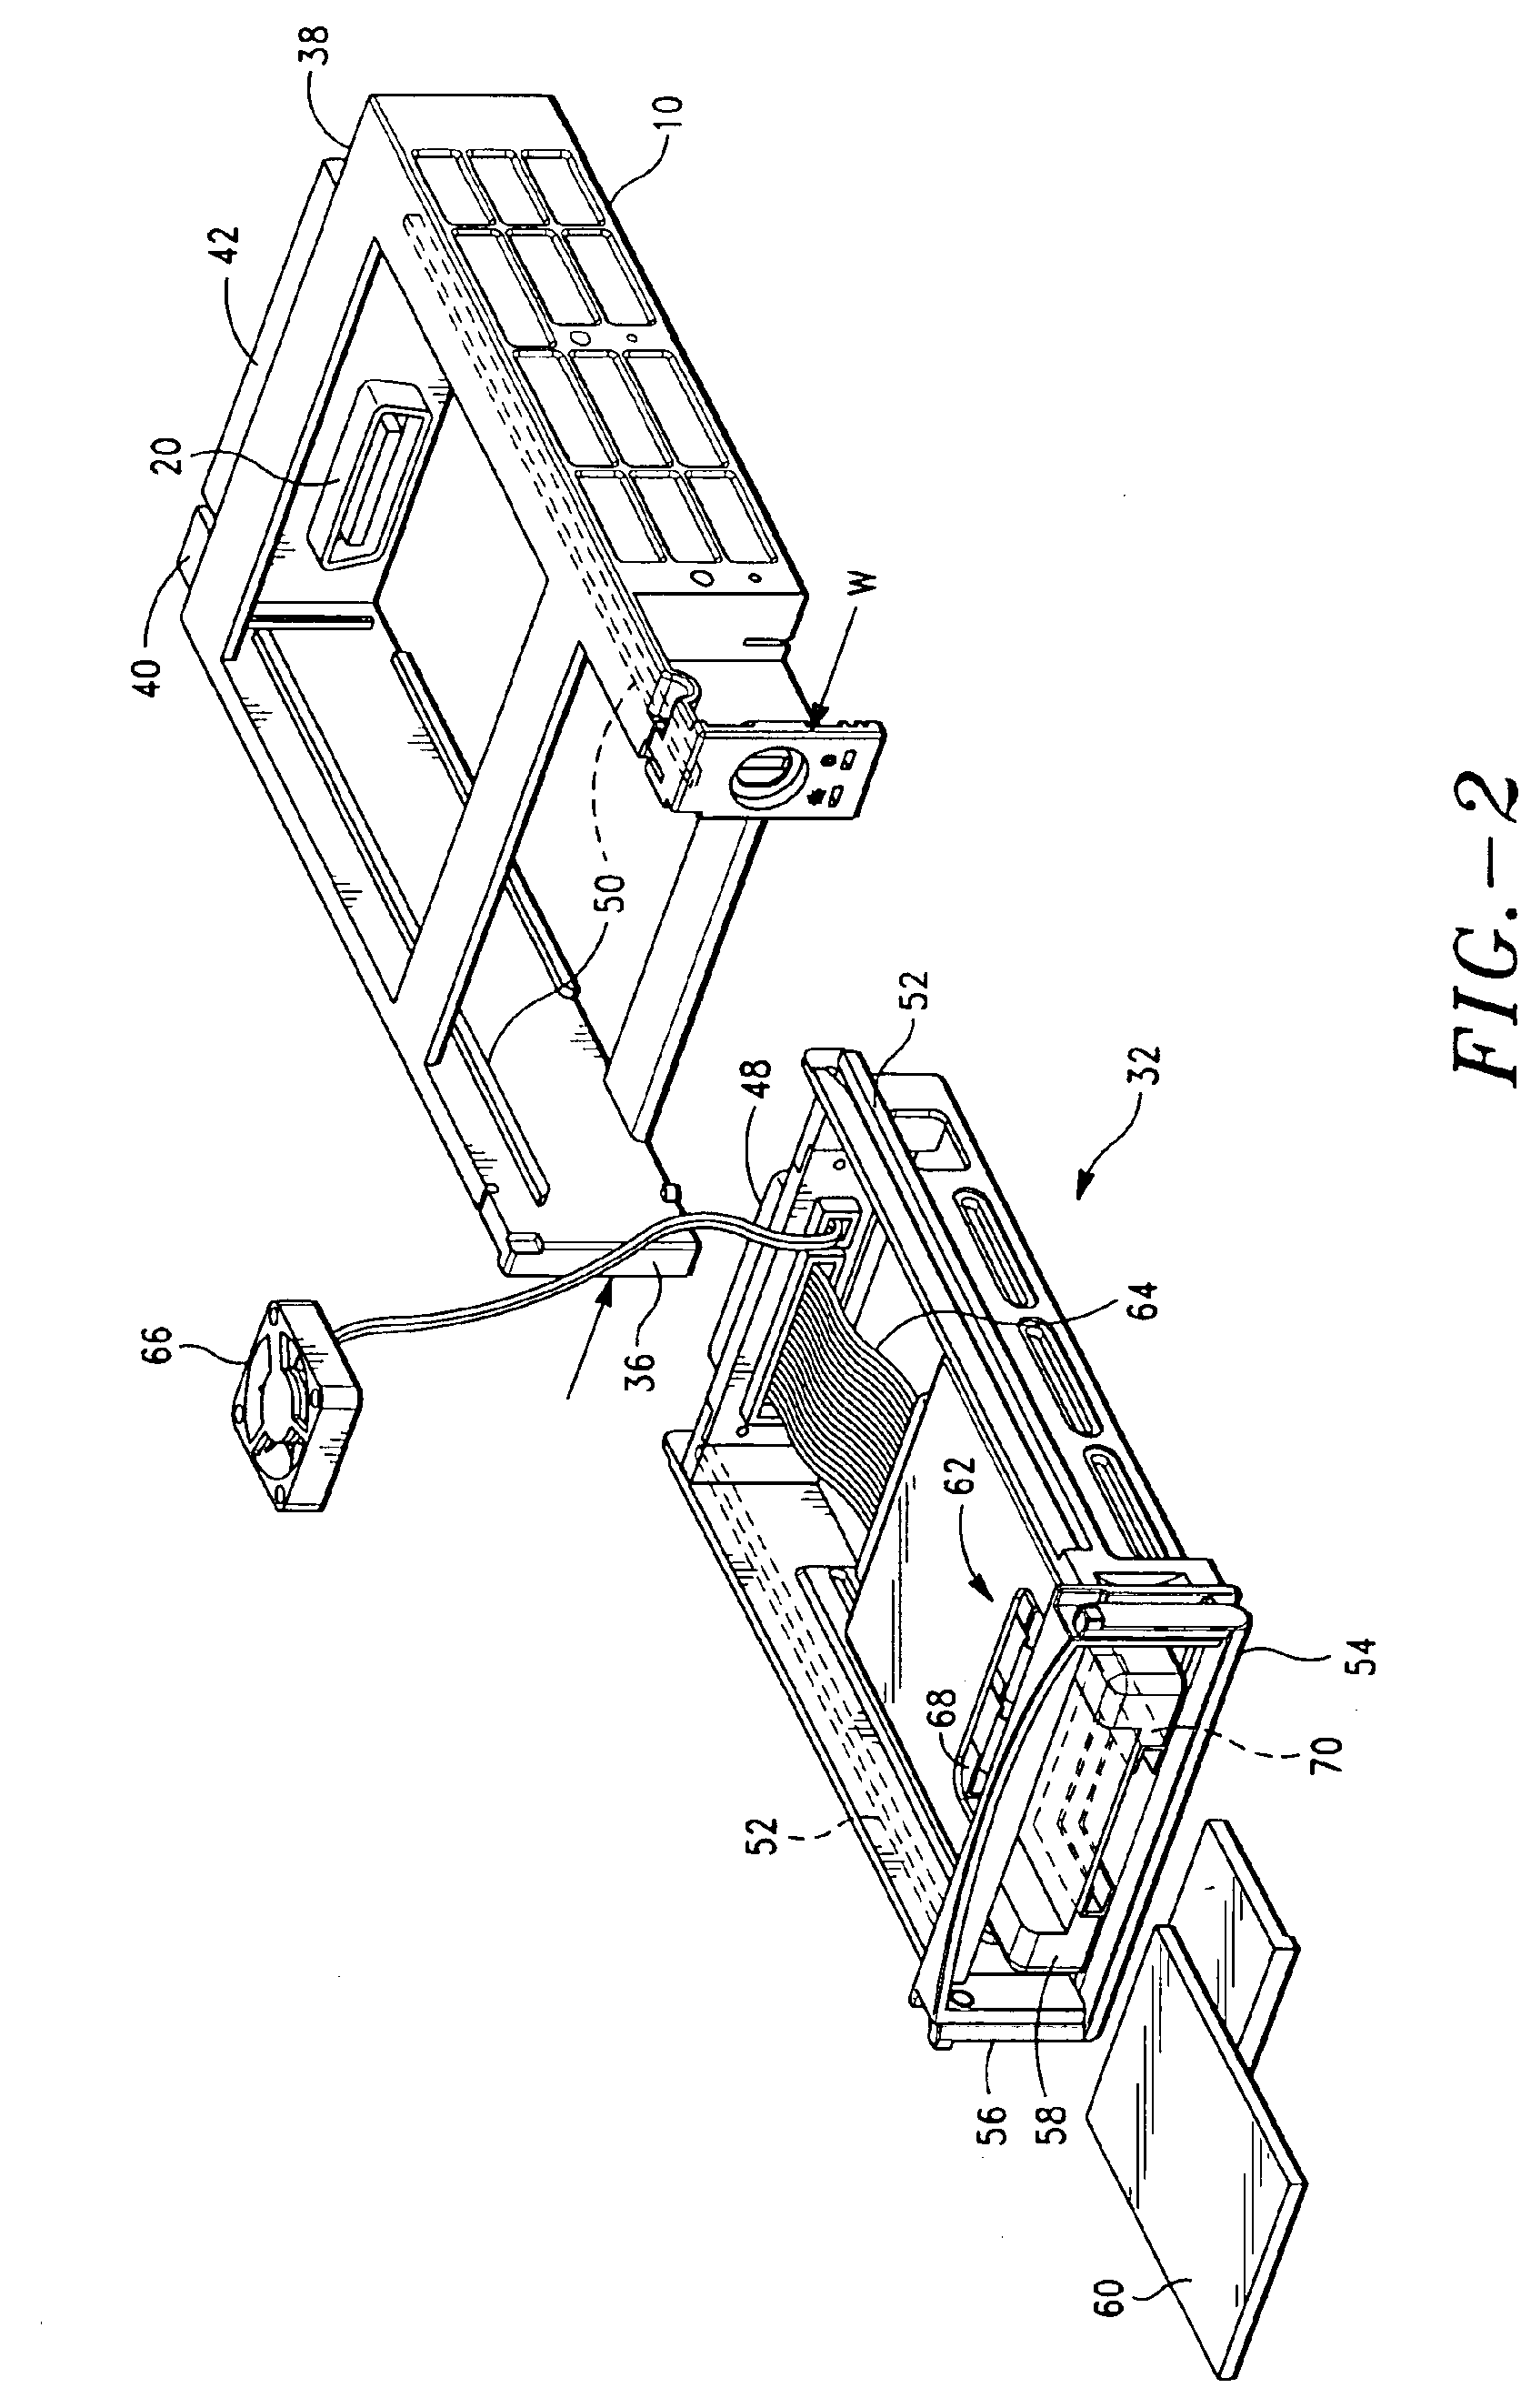 Docking apparatus for PC card devices